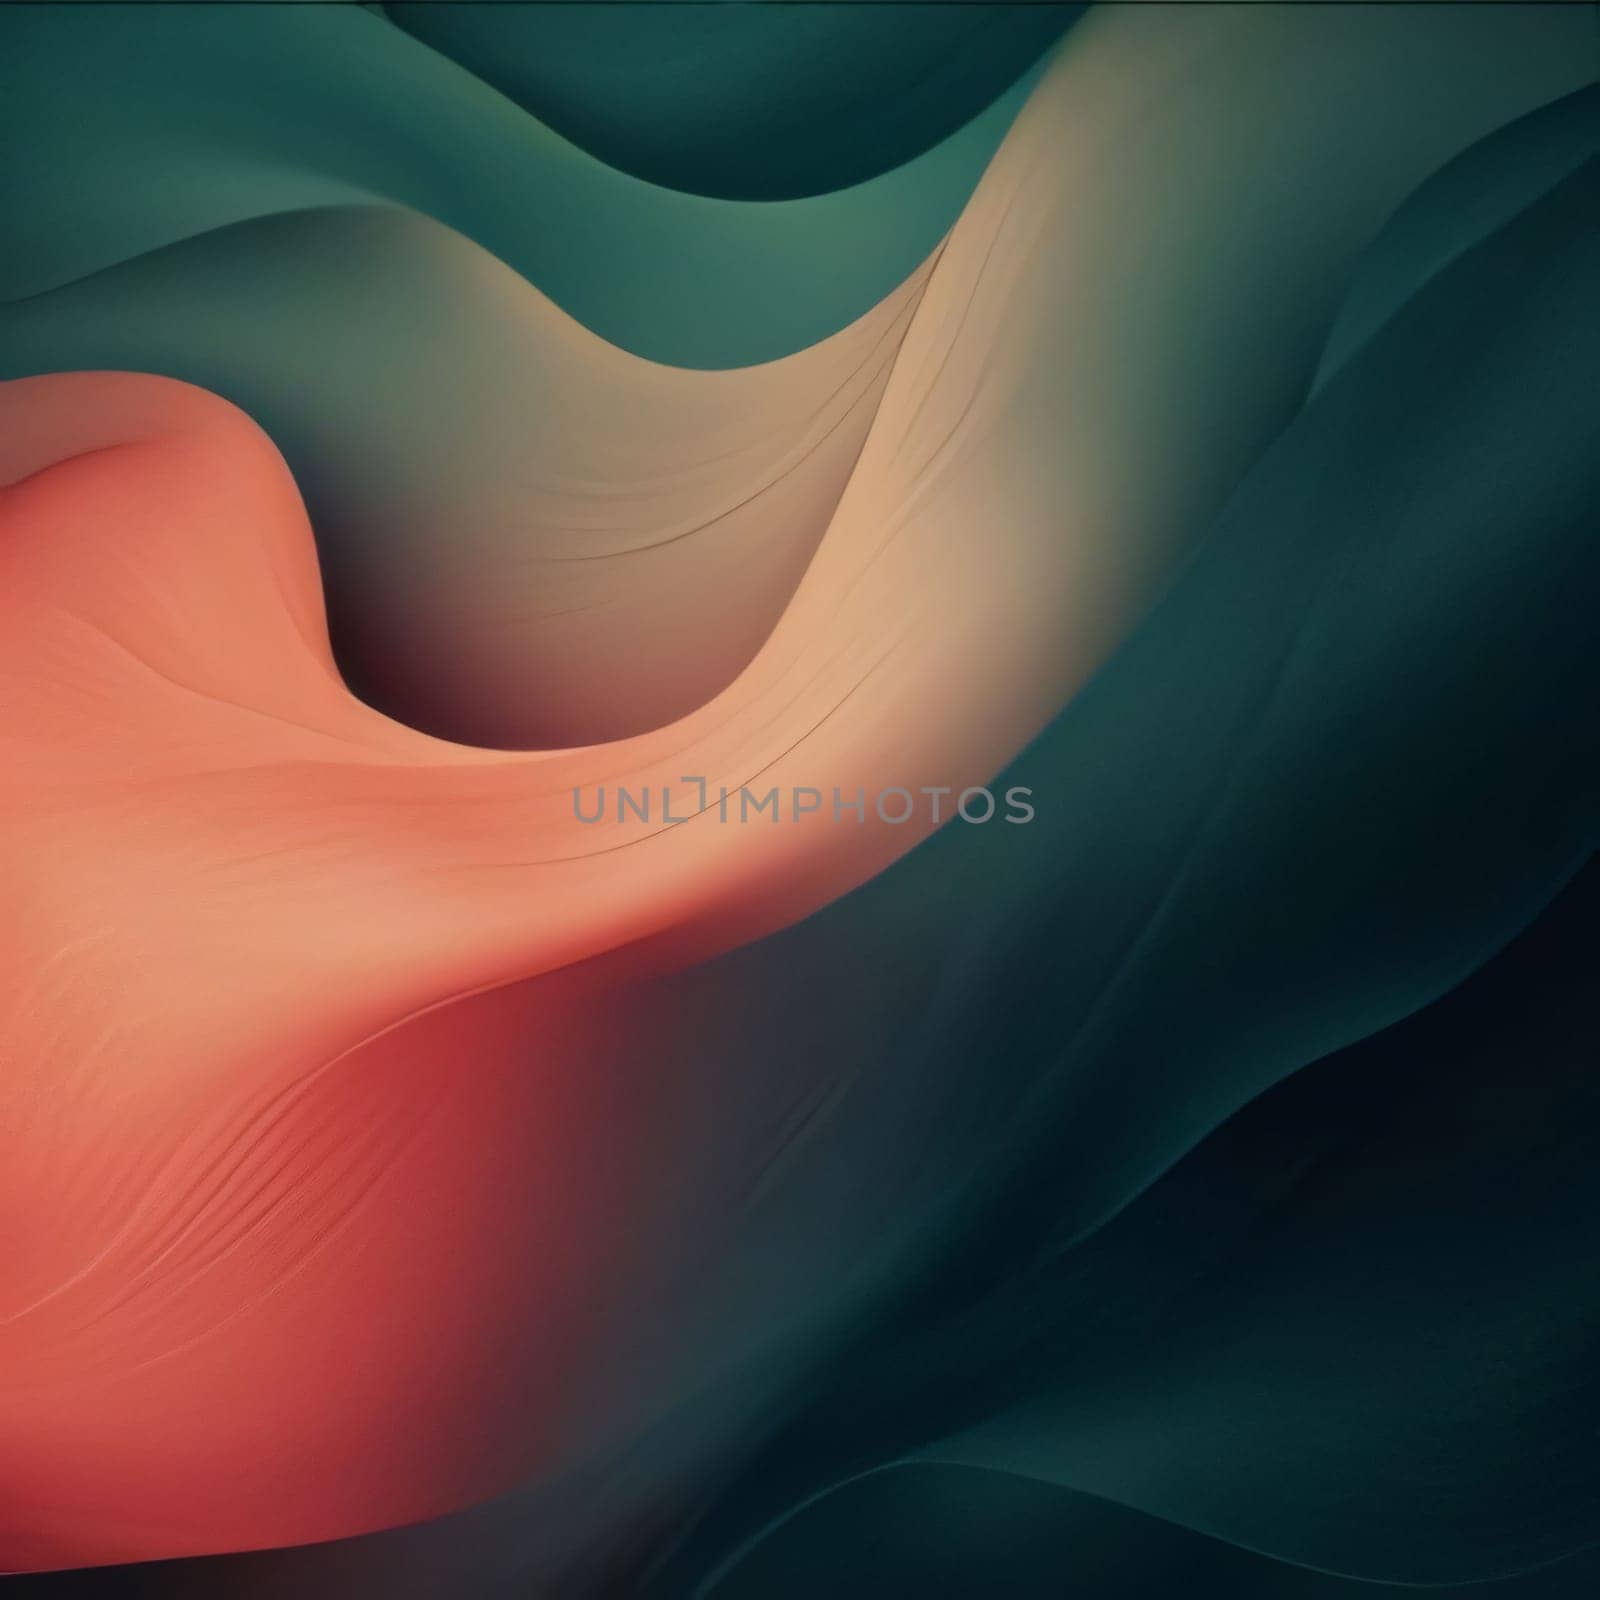 Abstract background design: abstract background with waves in green and orange colors, 3d render